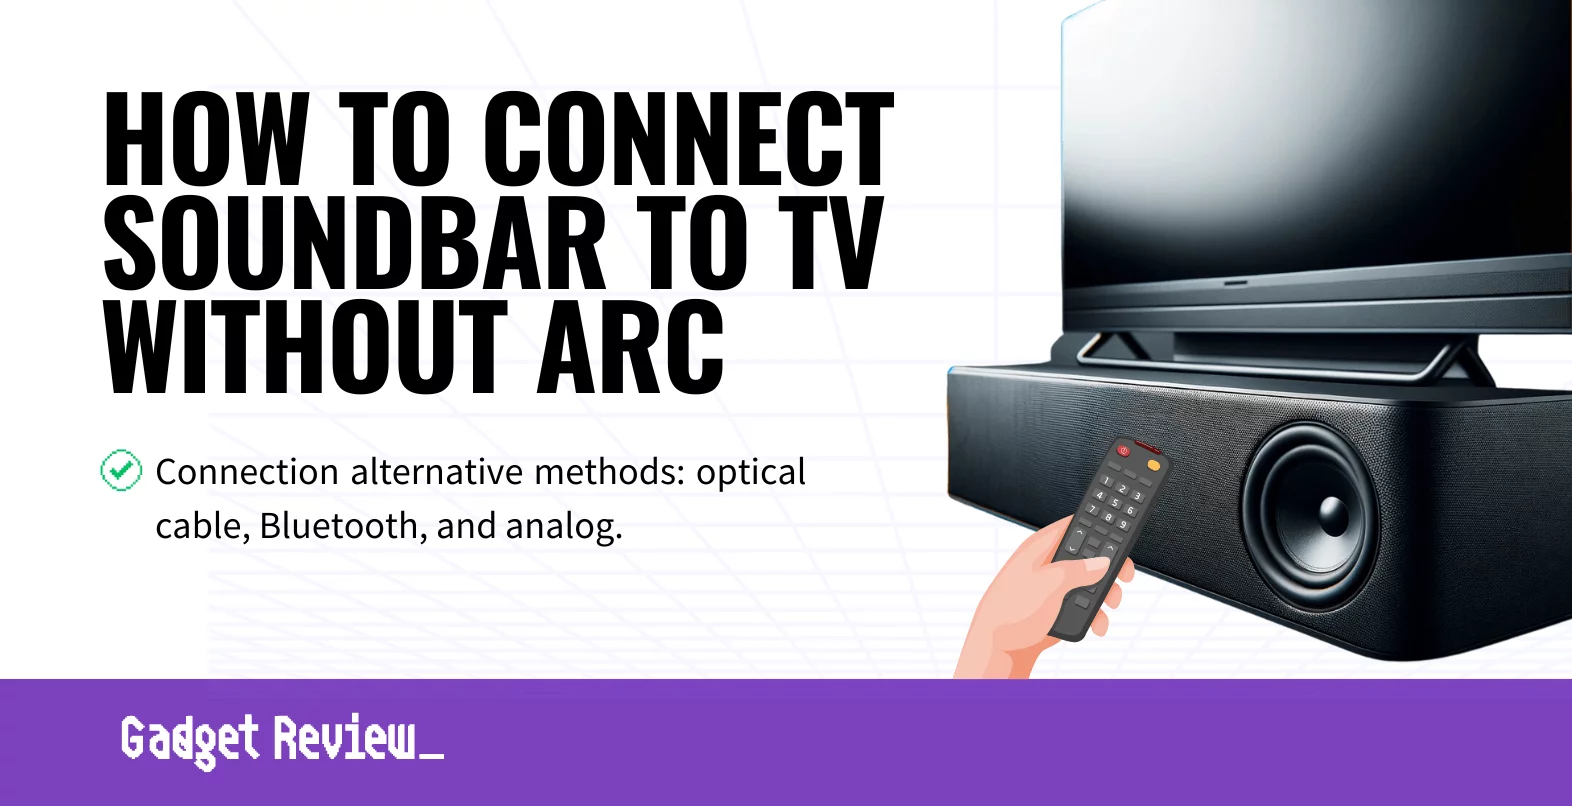 How To Connect A Soundbar To A TV Without ARC